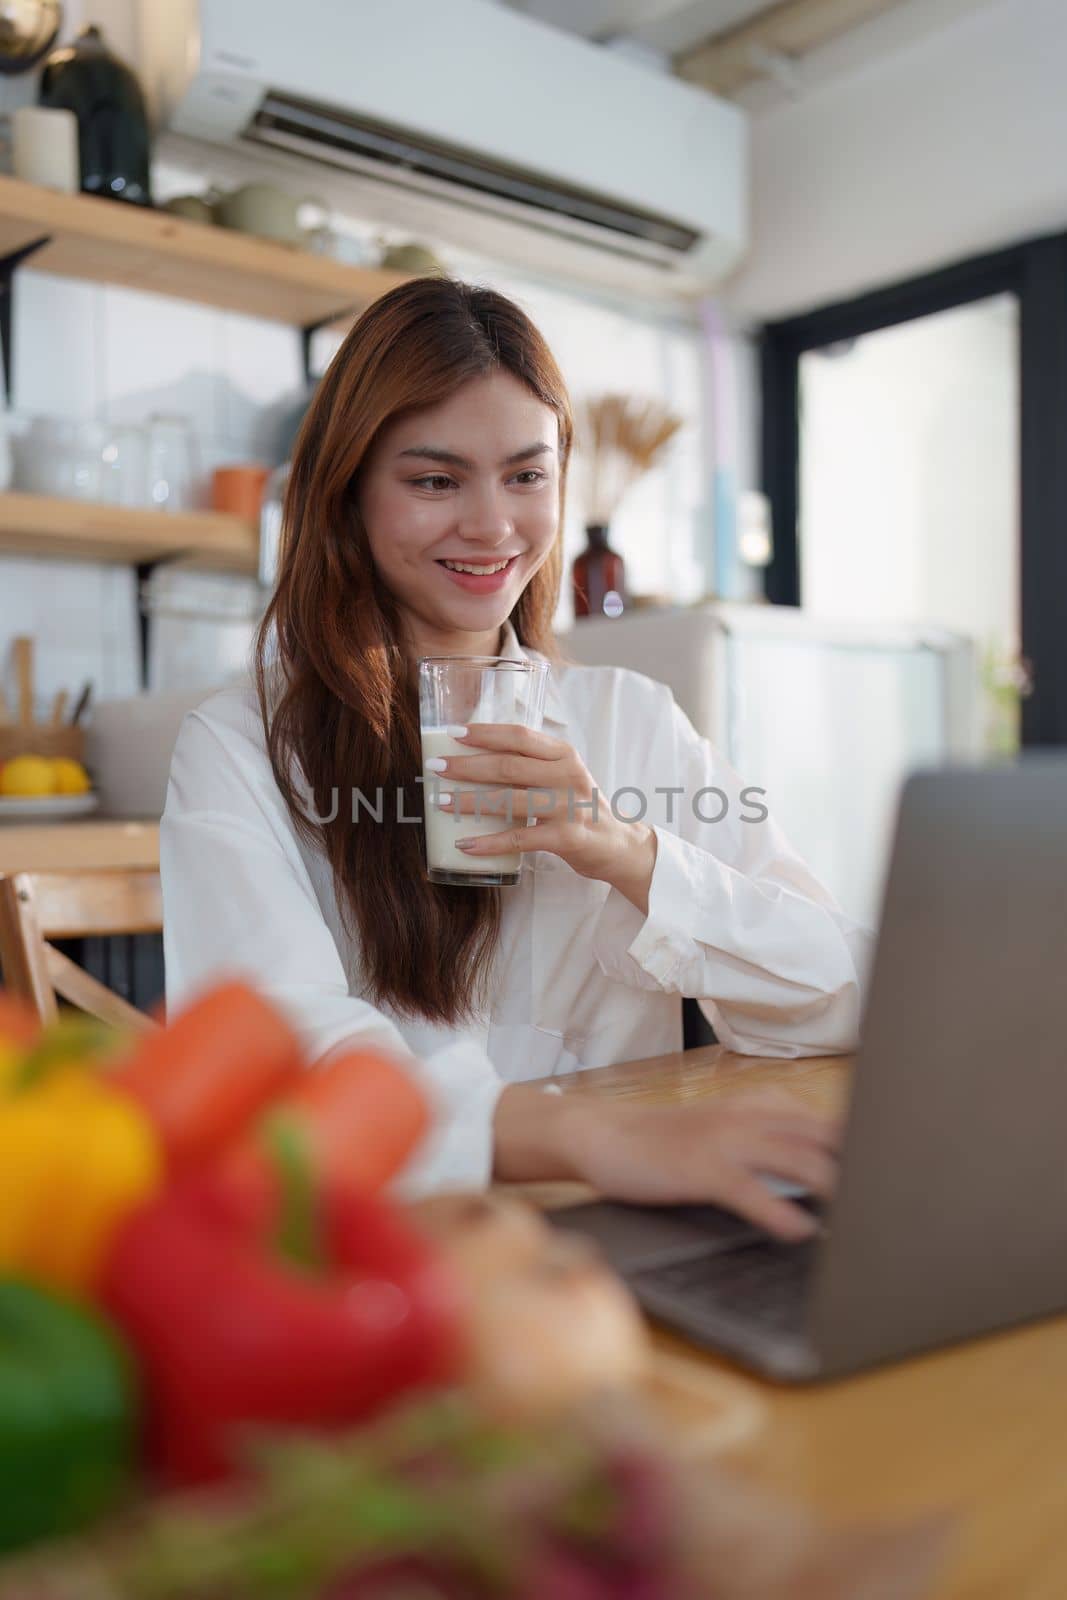 Portrait of a young cheerful asian woman drinking milk in kitchen room with healthy raw food. Vegetarianism, wellbeing and healthy lifestyle concept